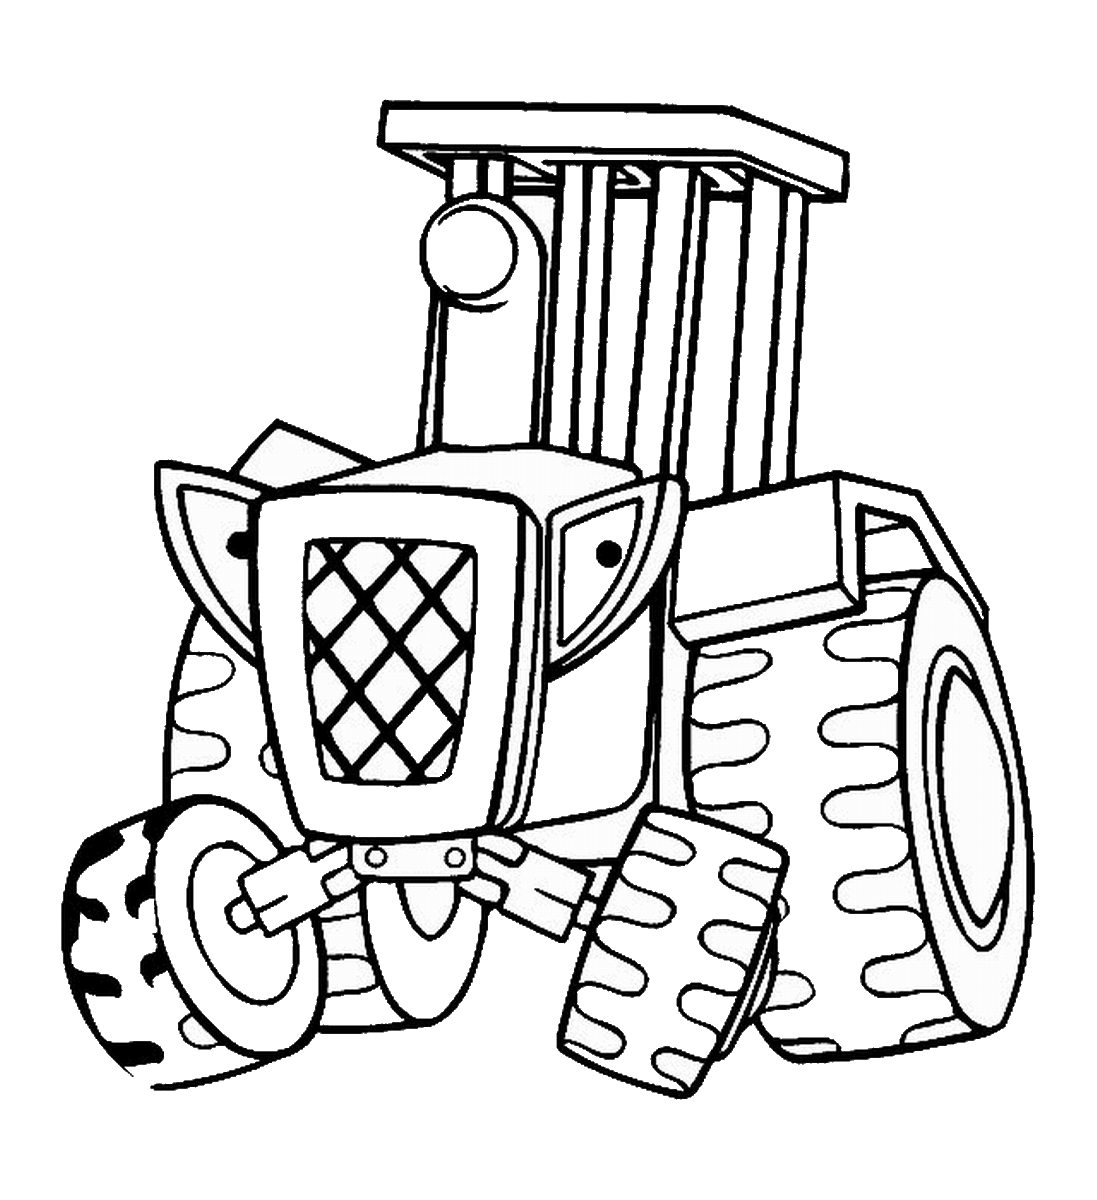 John Deere Coloring Pages